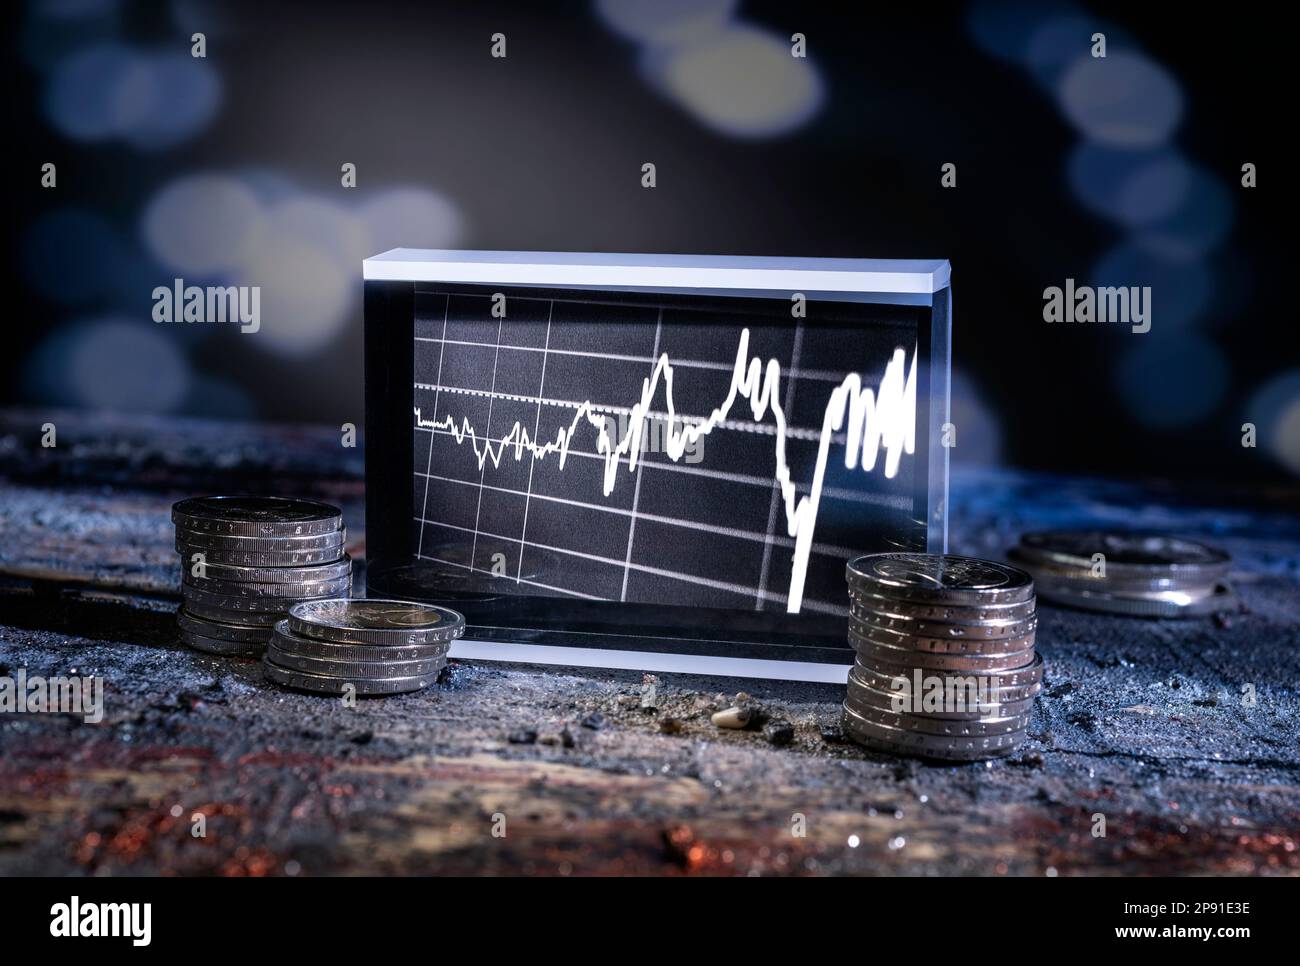 Stock chart and coins on stone floor in dark environment with blue light Stock Photo